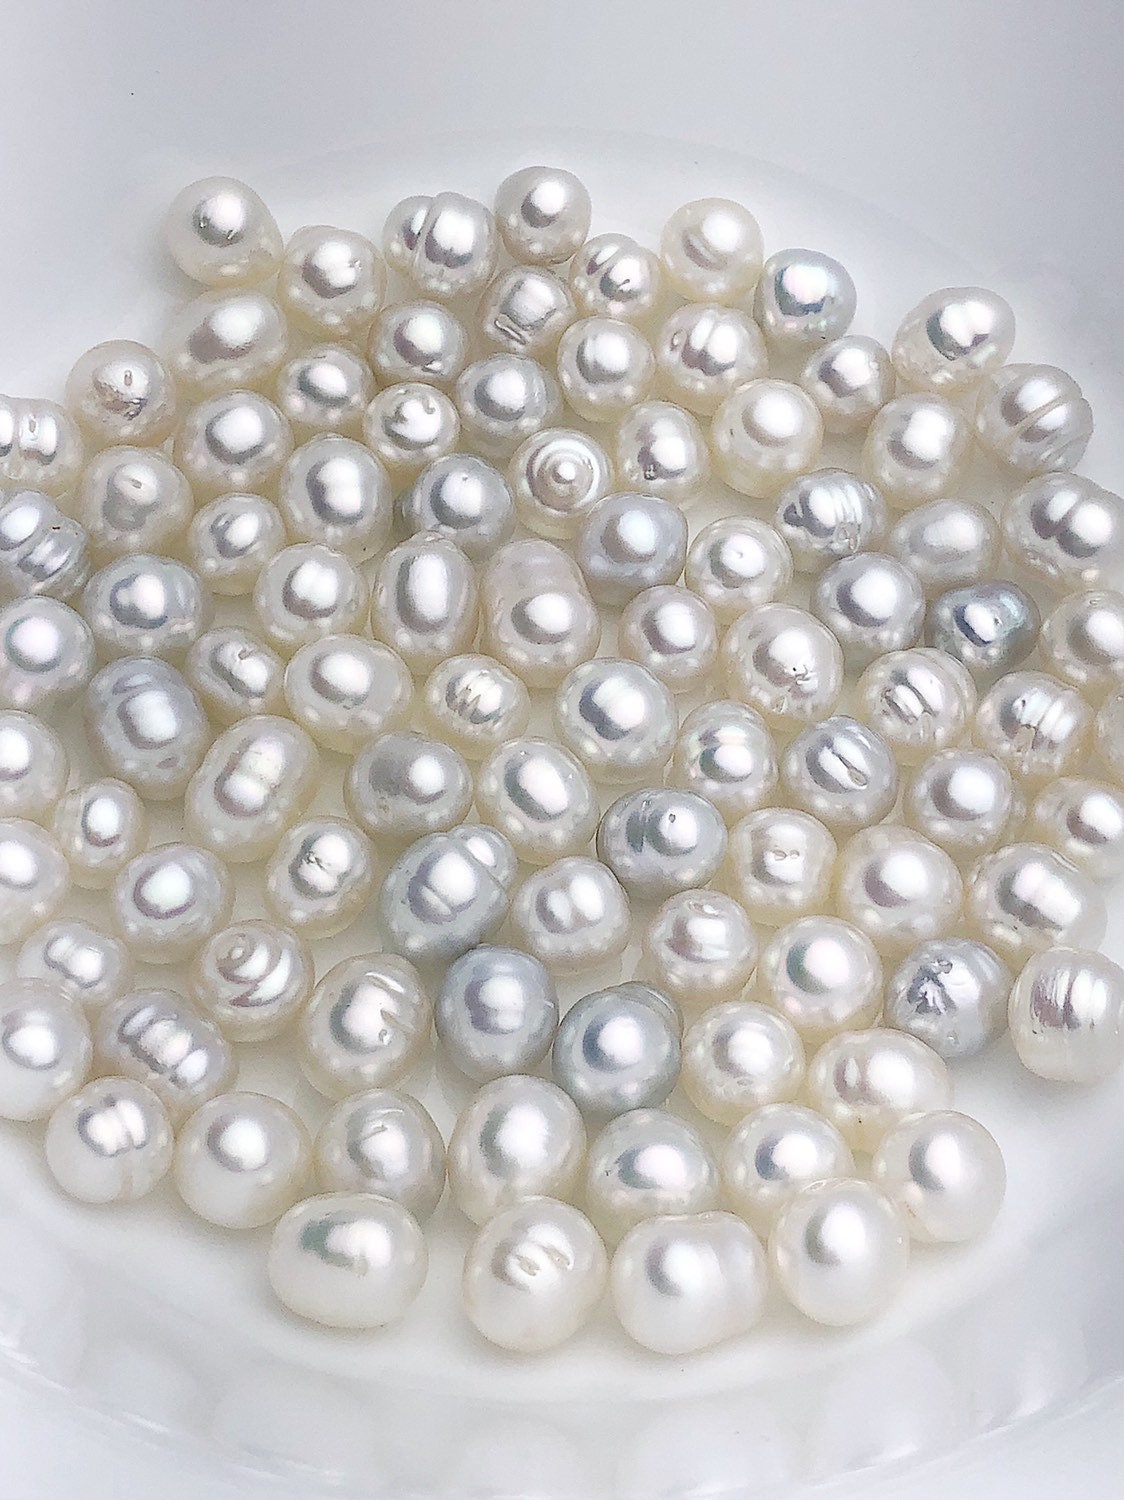 White South Sea Loose Pearls, Australia, Drops/Ovals, 9mm, AA Quality